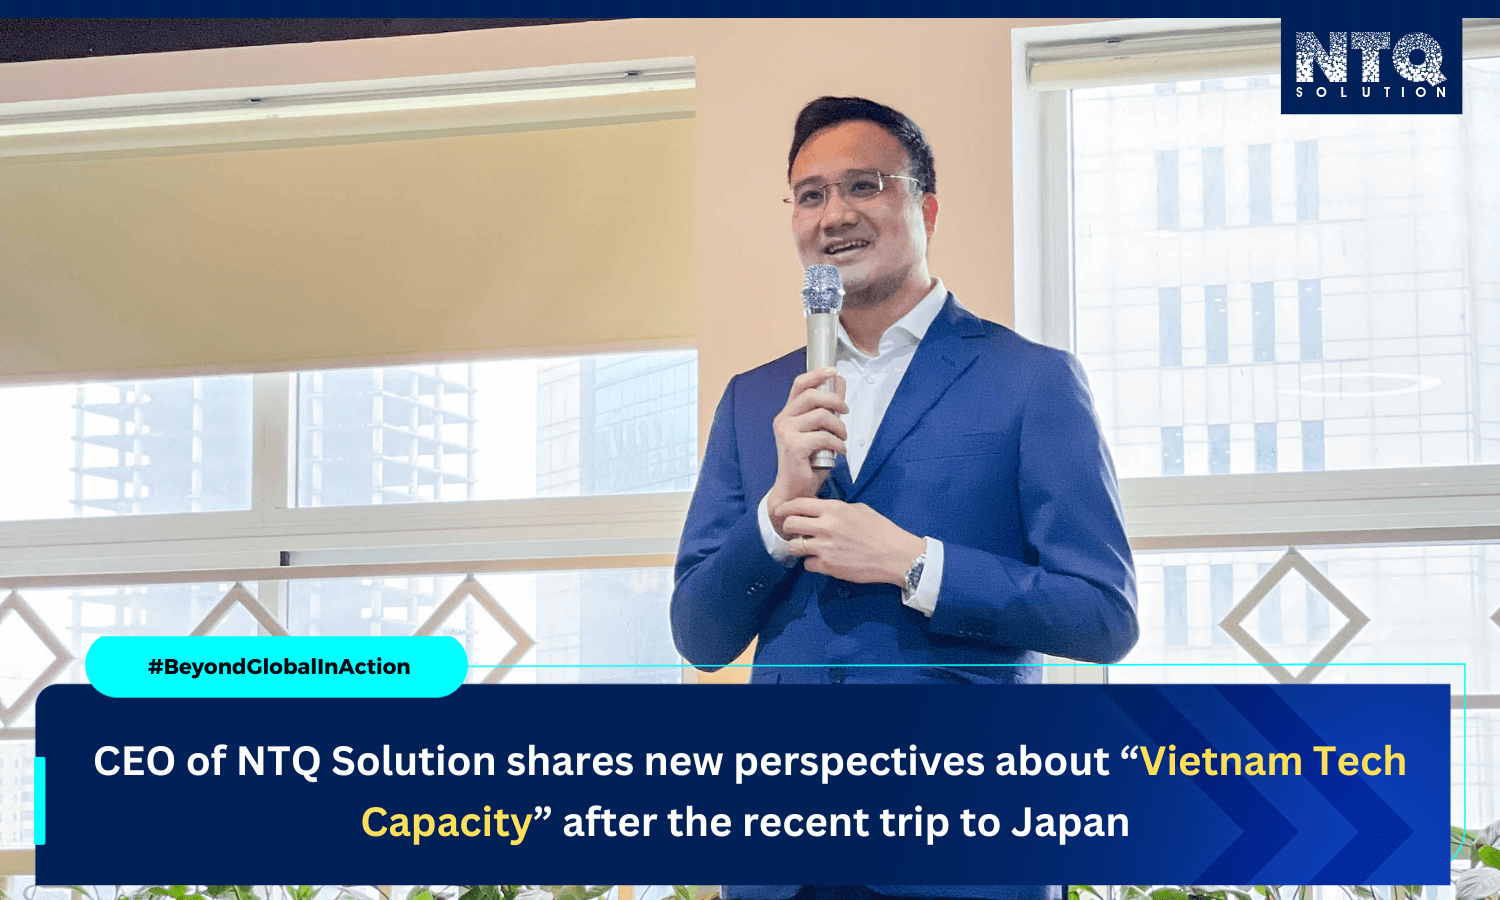 Beyond Global In Action #1: CEO of NTQ Solution shares perspectives about “Vietnam Tech Capacity” after the business trip to Japan